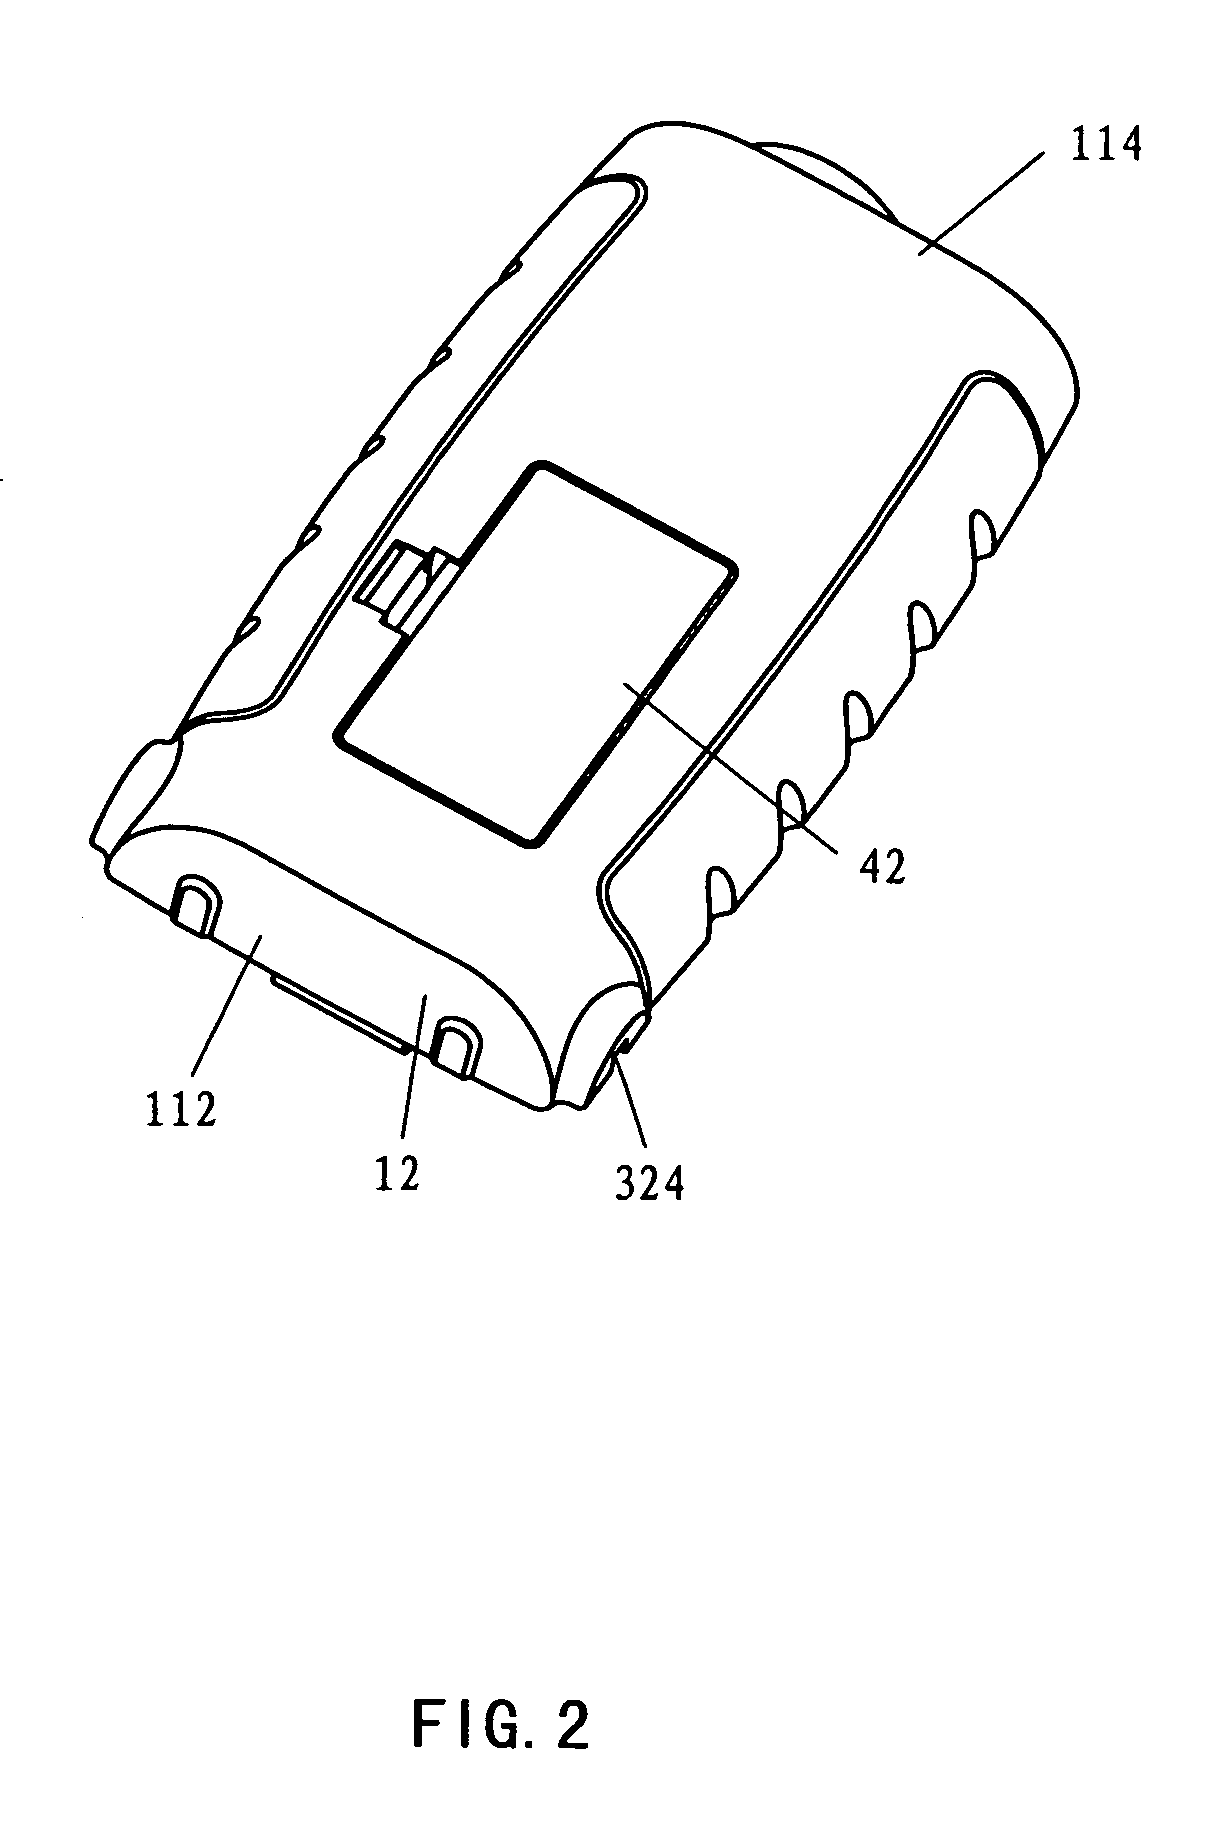 Distance measuring device with laser indicating device